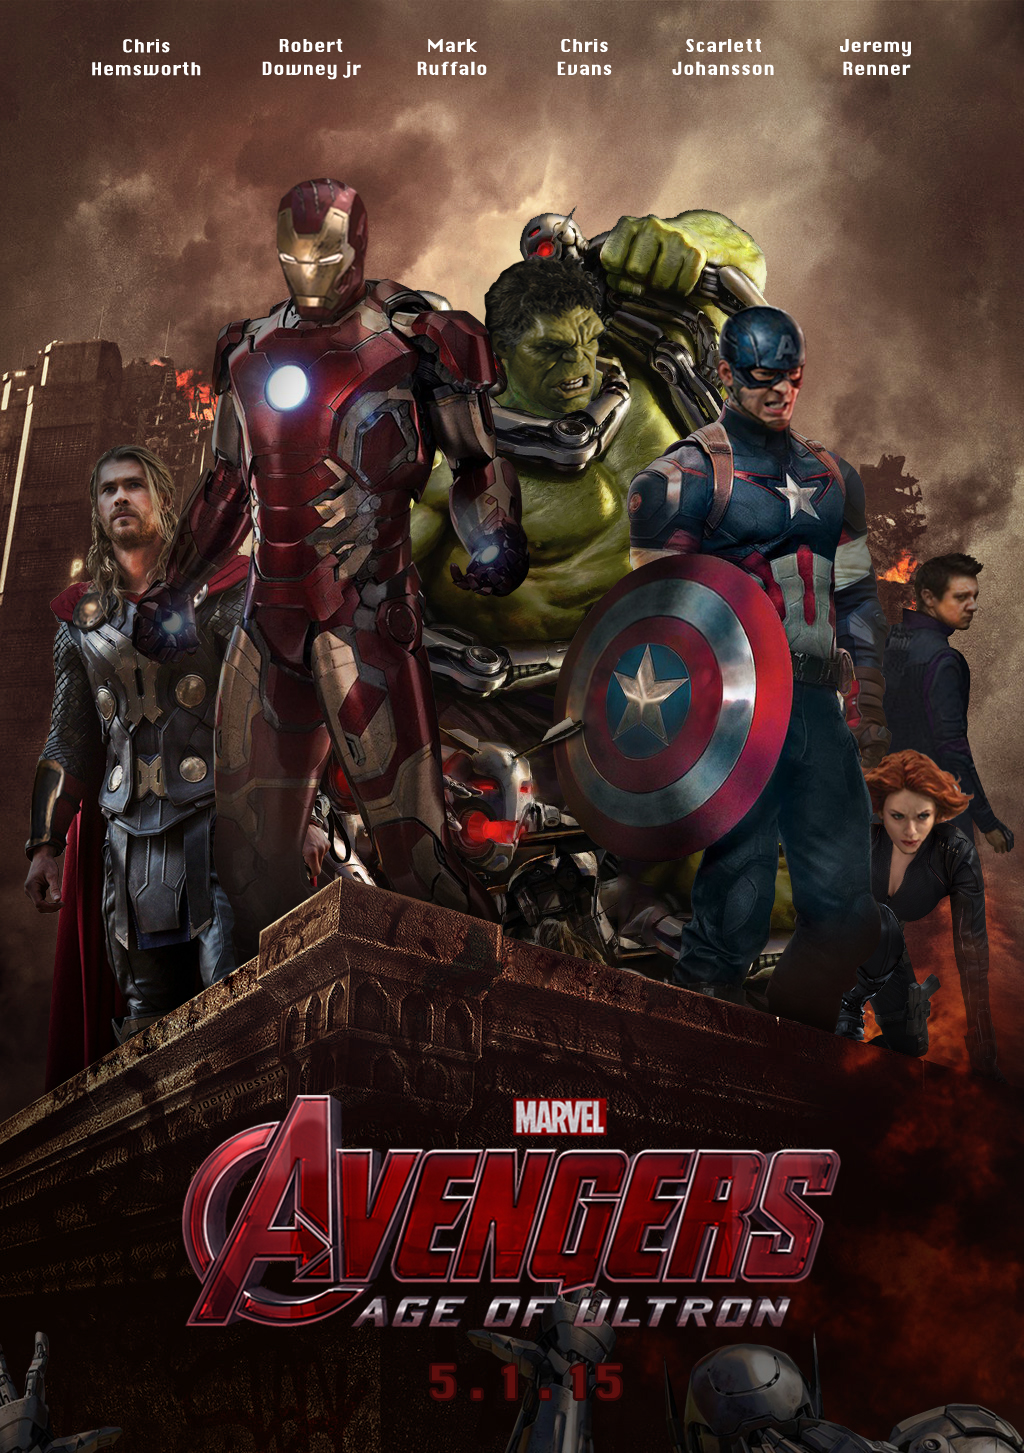 Avengers-age-of-Ultron-poster-the-avengers-age-of-ultron-37434941-1024-1453